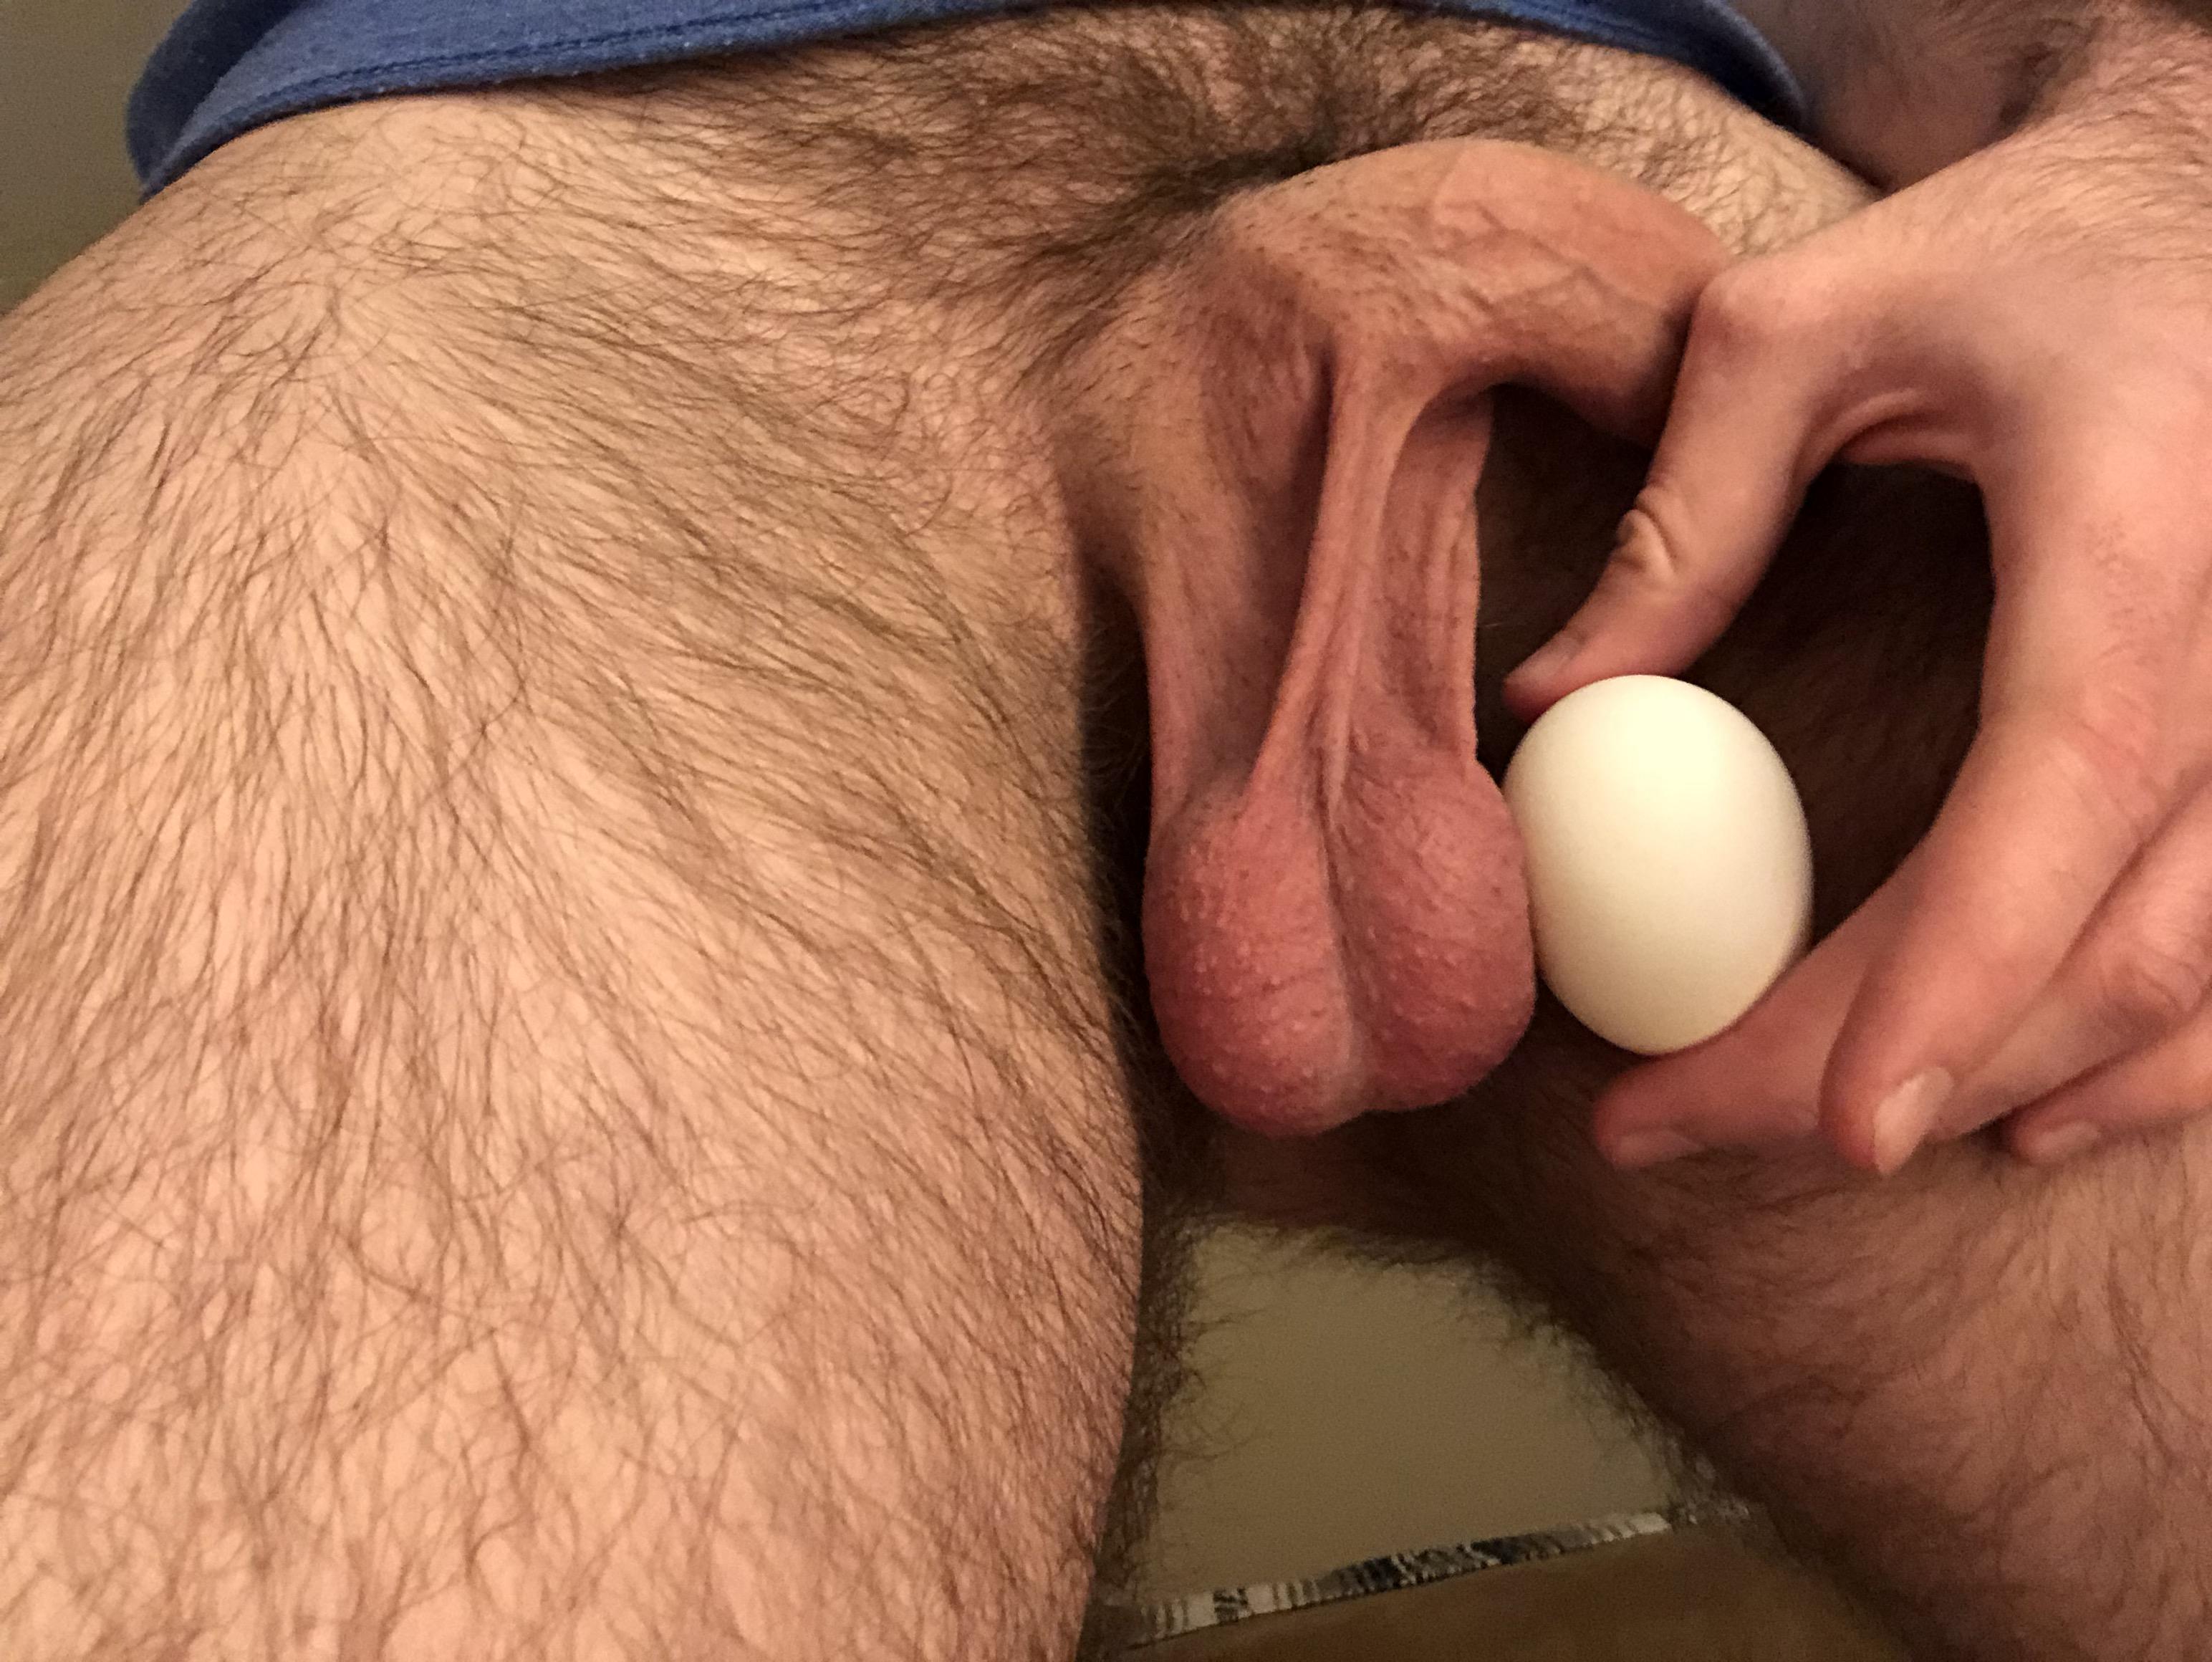 My balls compared to an egg